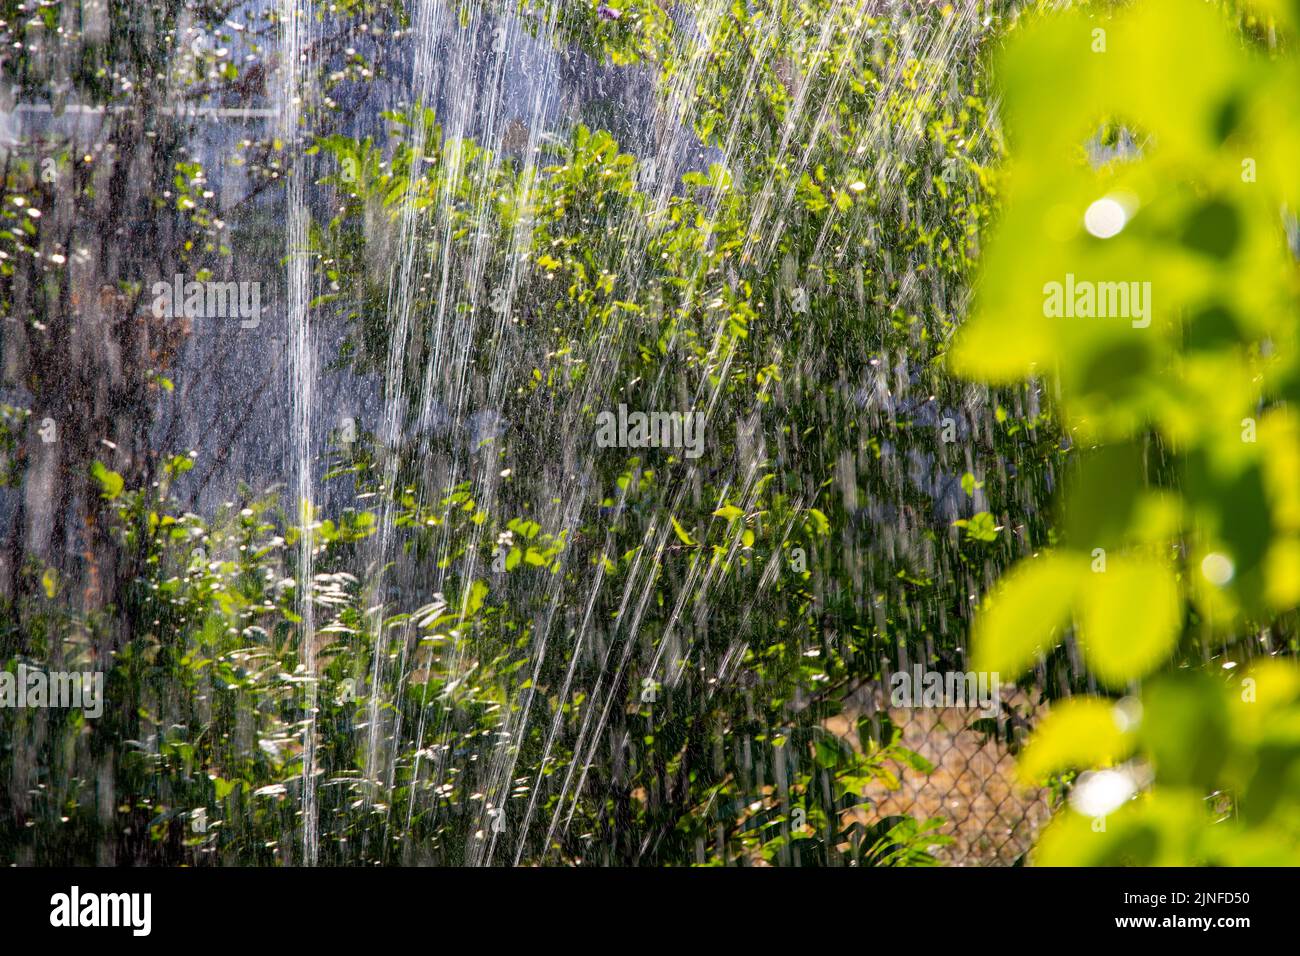 Garden irrigation: Watering a garden with a sprinkler system Stock Photo